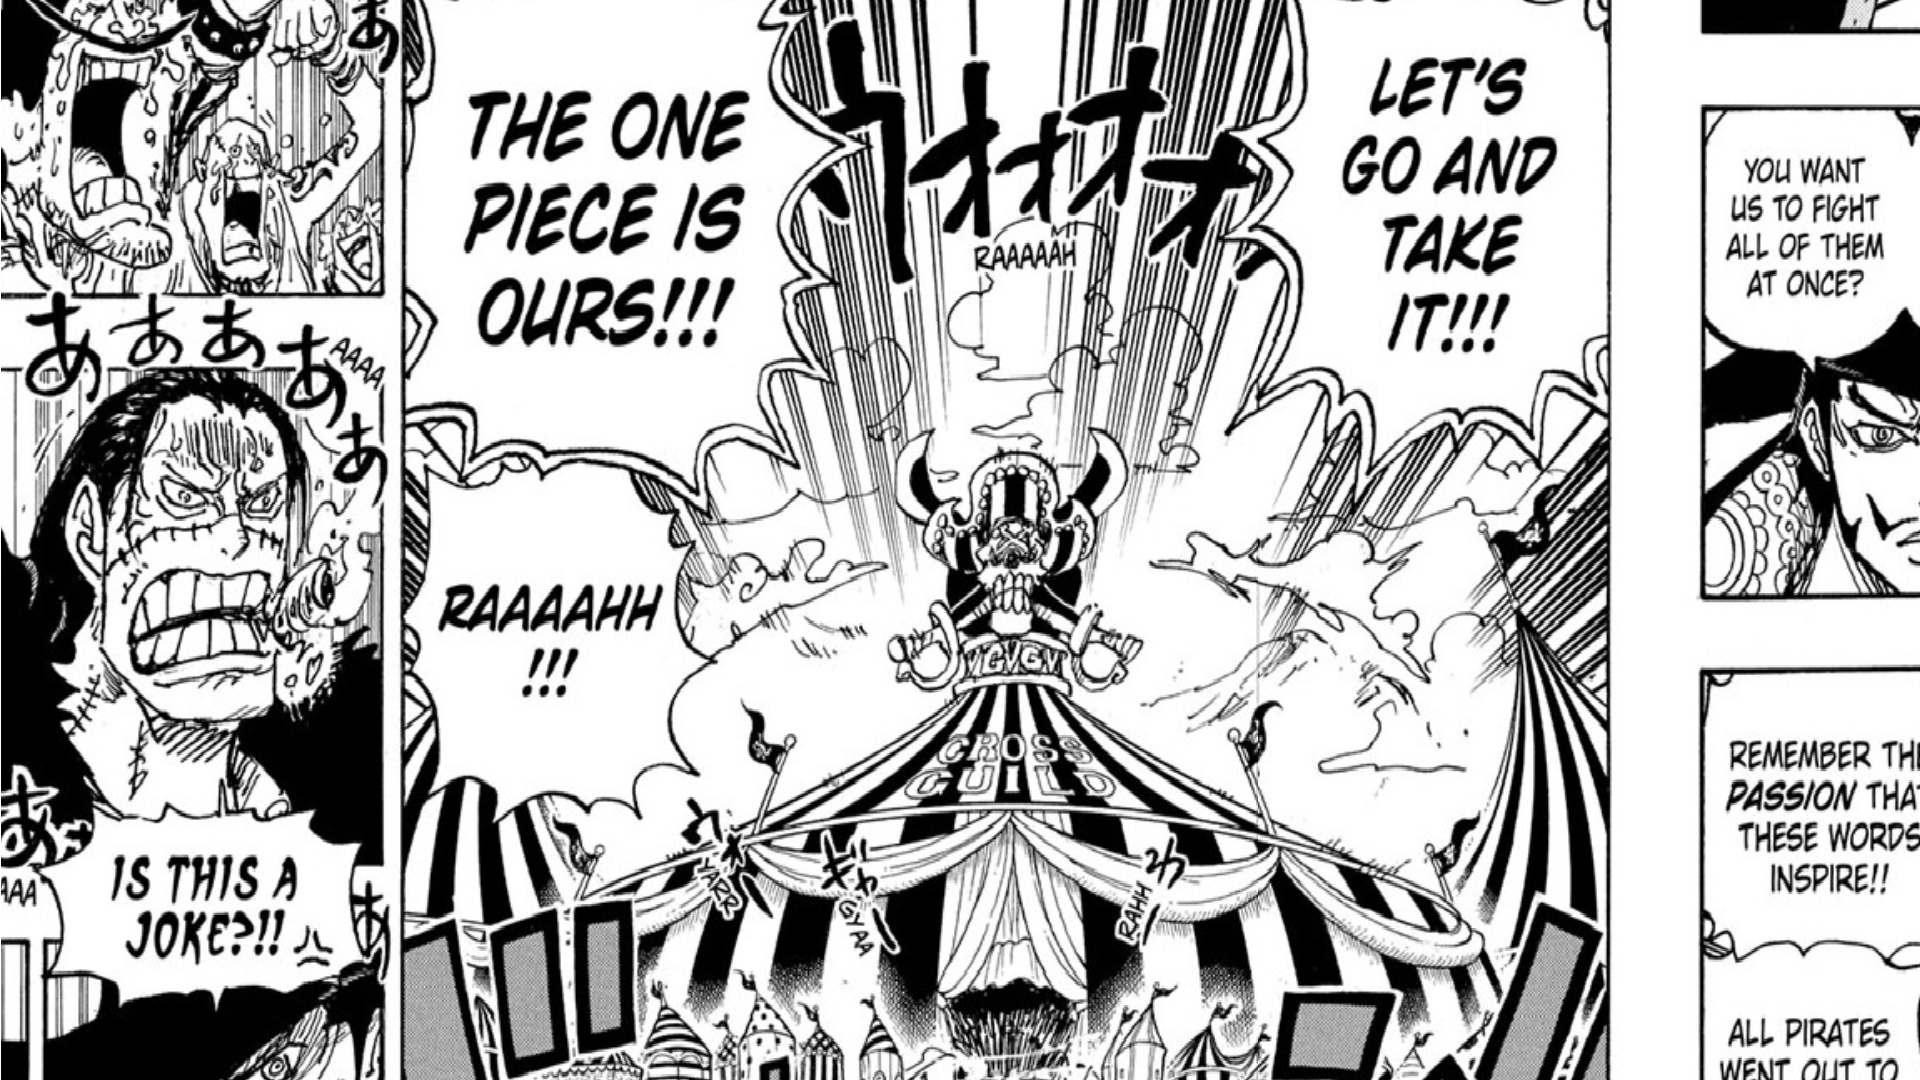 One piece Chapter 1102: Release Date, Spoilers, Raw scans, where to read?